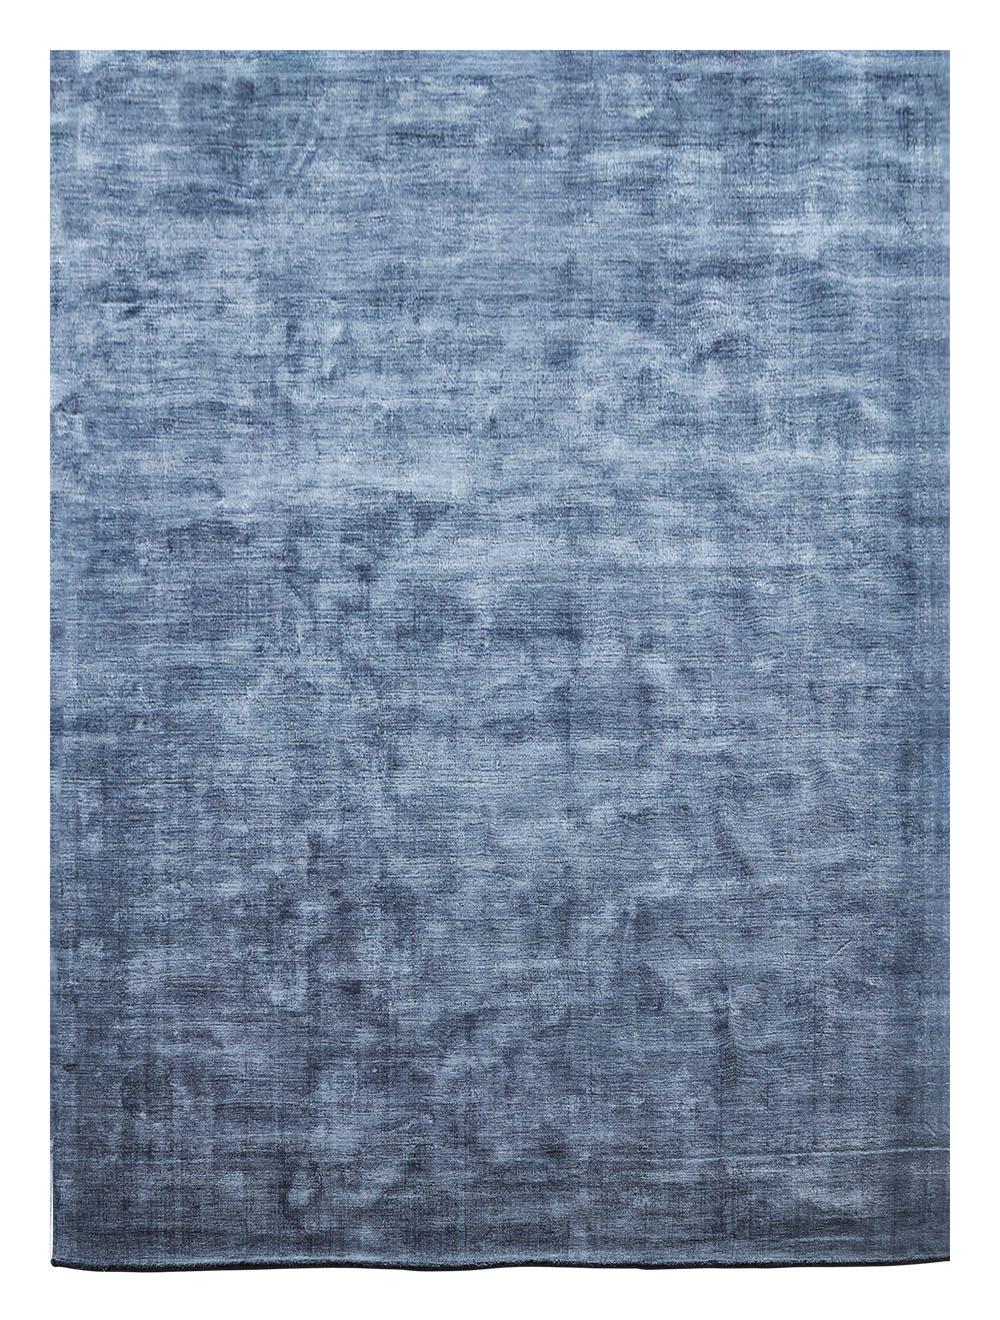 Washed blue karma carpet by Massimo Copenhagen.
Handwoven
Materials: 100% recycled bamboo.
Dimensions: W 250 x H 350 cm.
Available colors: light grey, nougat brown, washed blue, and olive green..
Other dimensions are available: 160 x 230 cm,